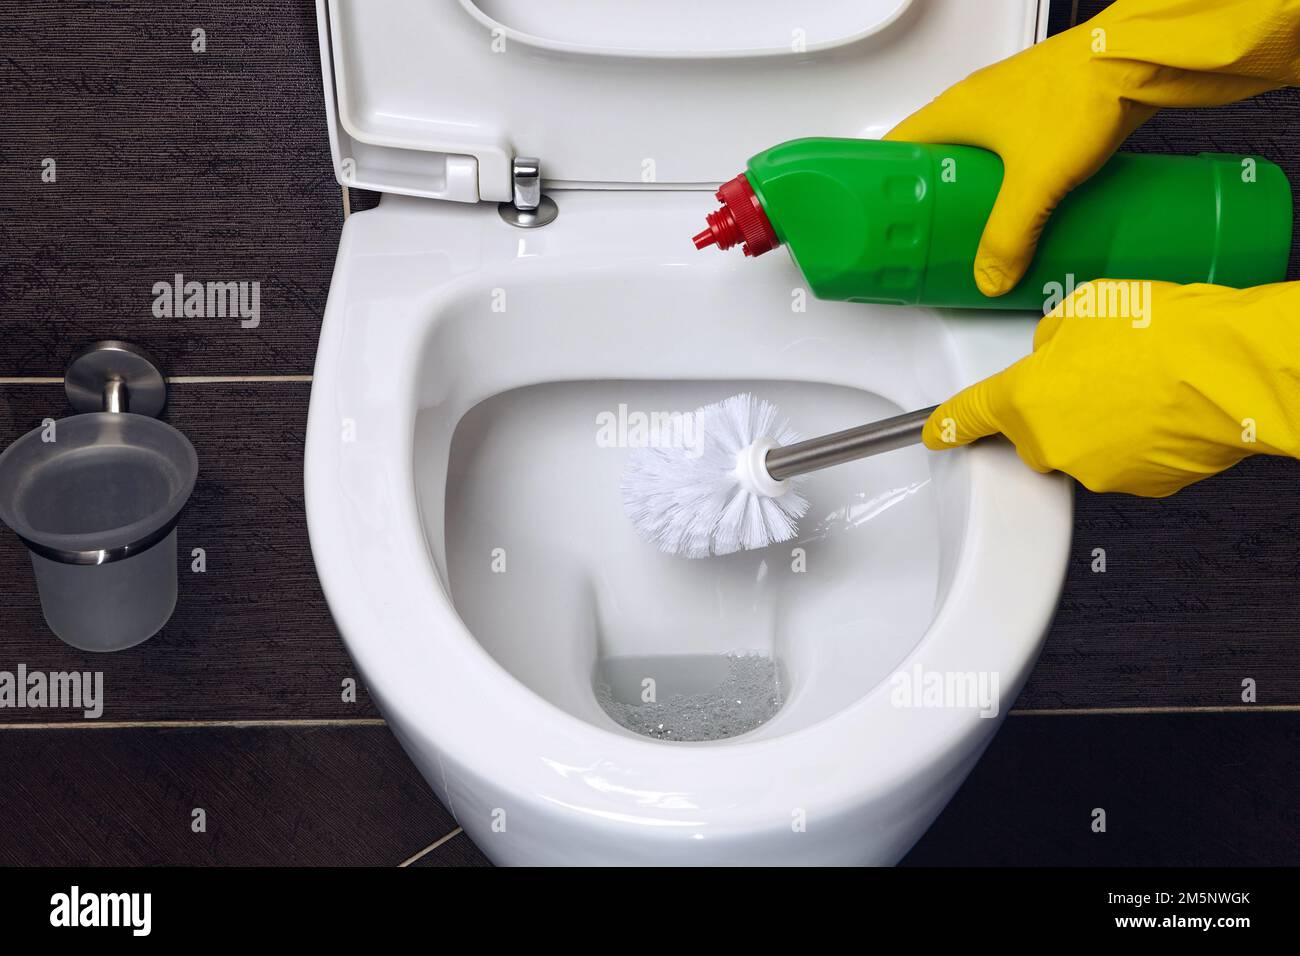 Person in yellow rubber gloves cleans the toilet bowl with a brush and disinfectant Stock Photo